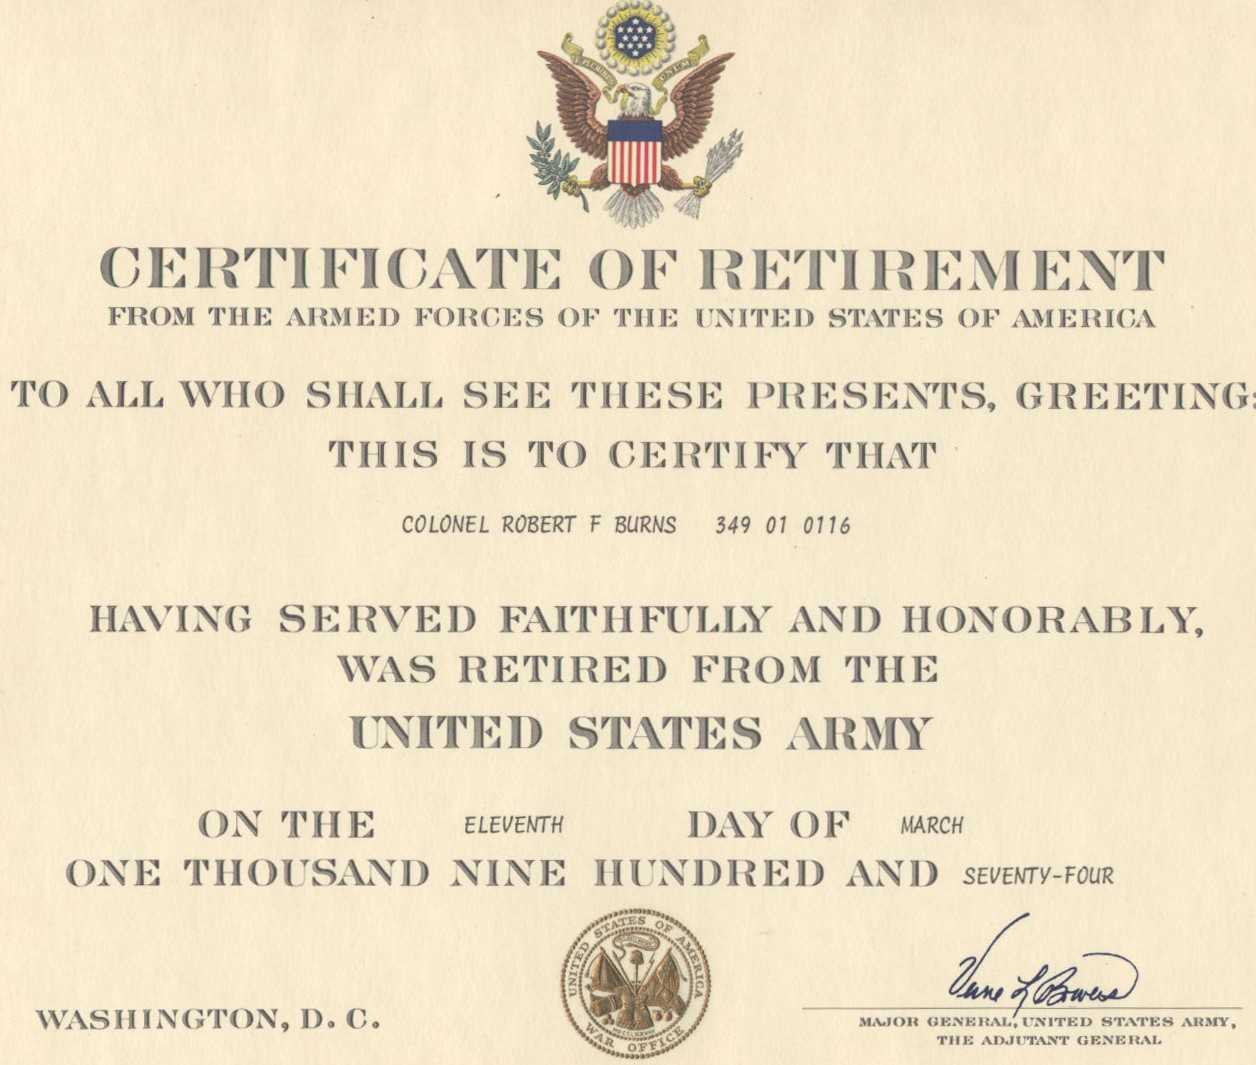 Pin On Pinterest. Sample Images Frompo. . Insanity Pertaining To Retirement Certificate Template